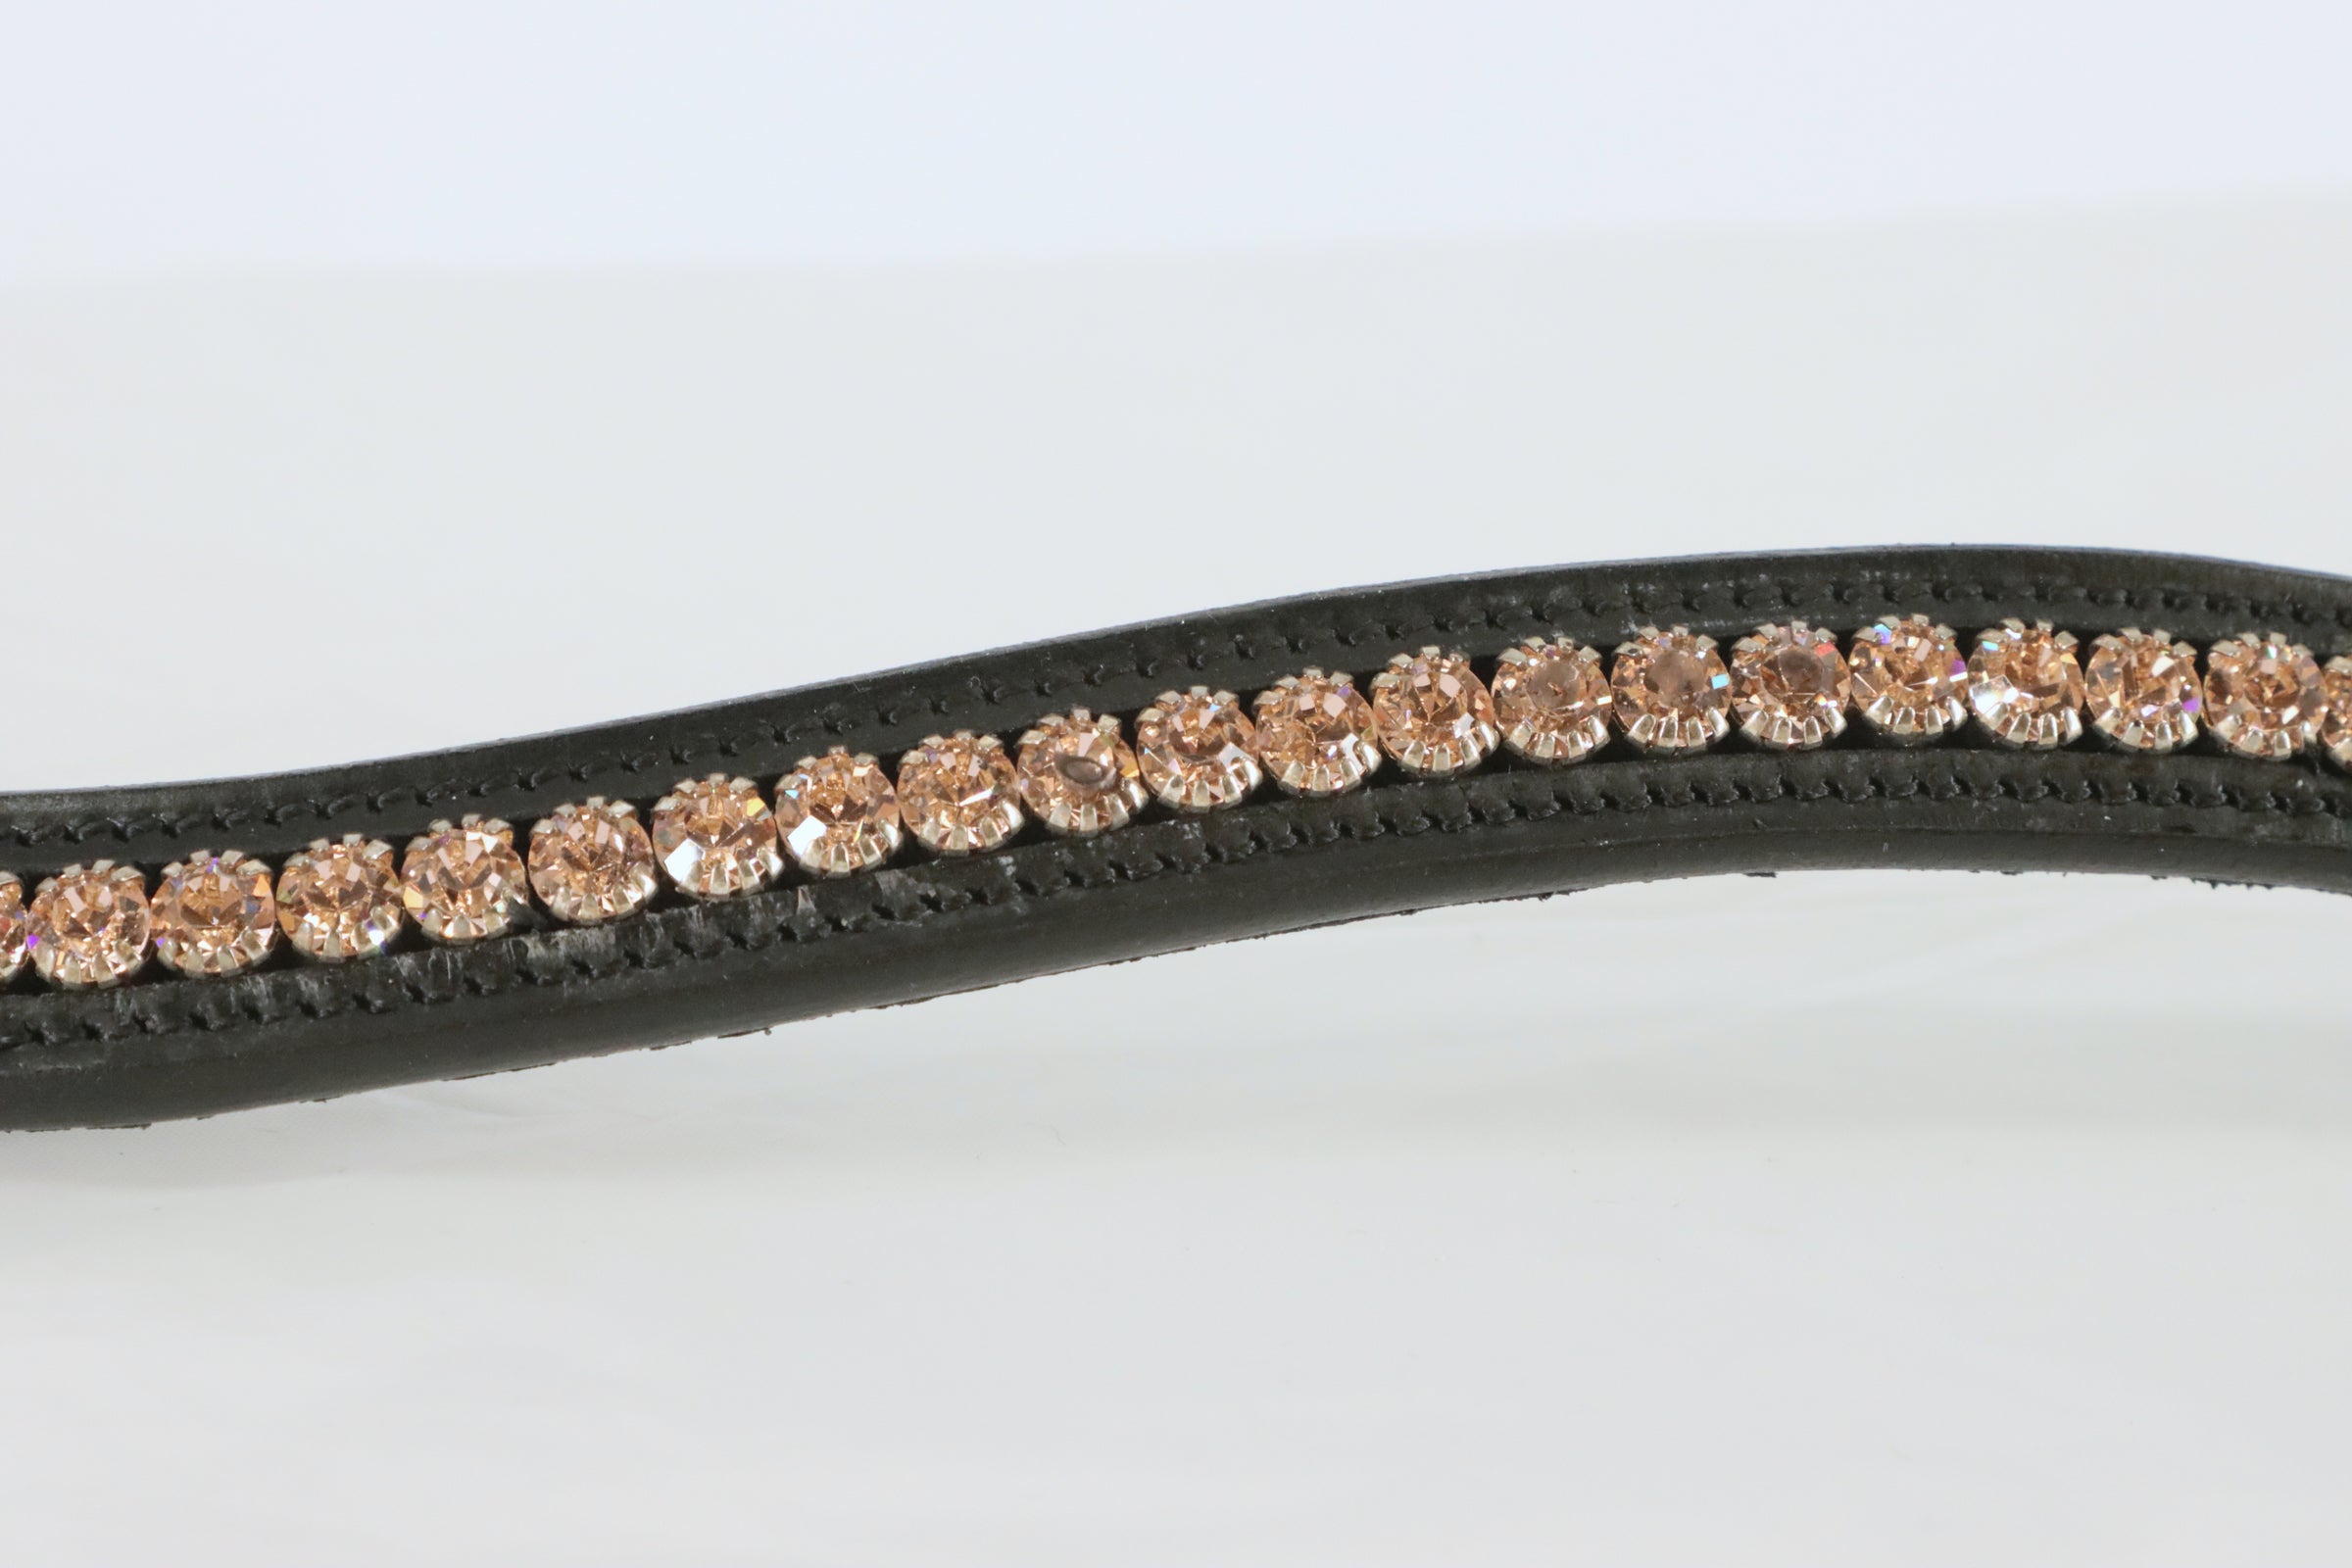 BR inset rose gold Tiffany curved browband